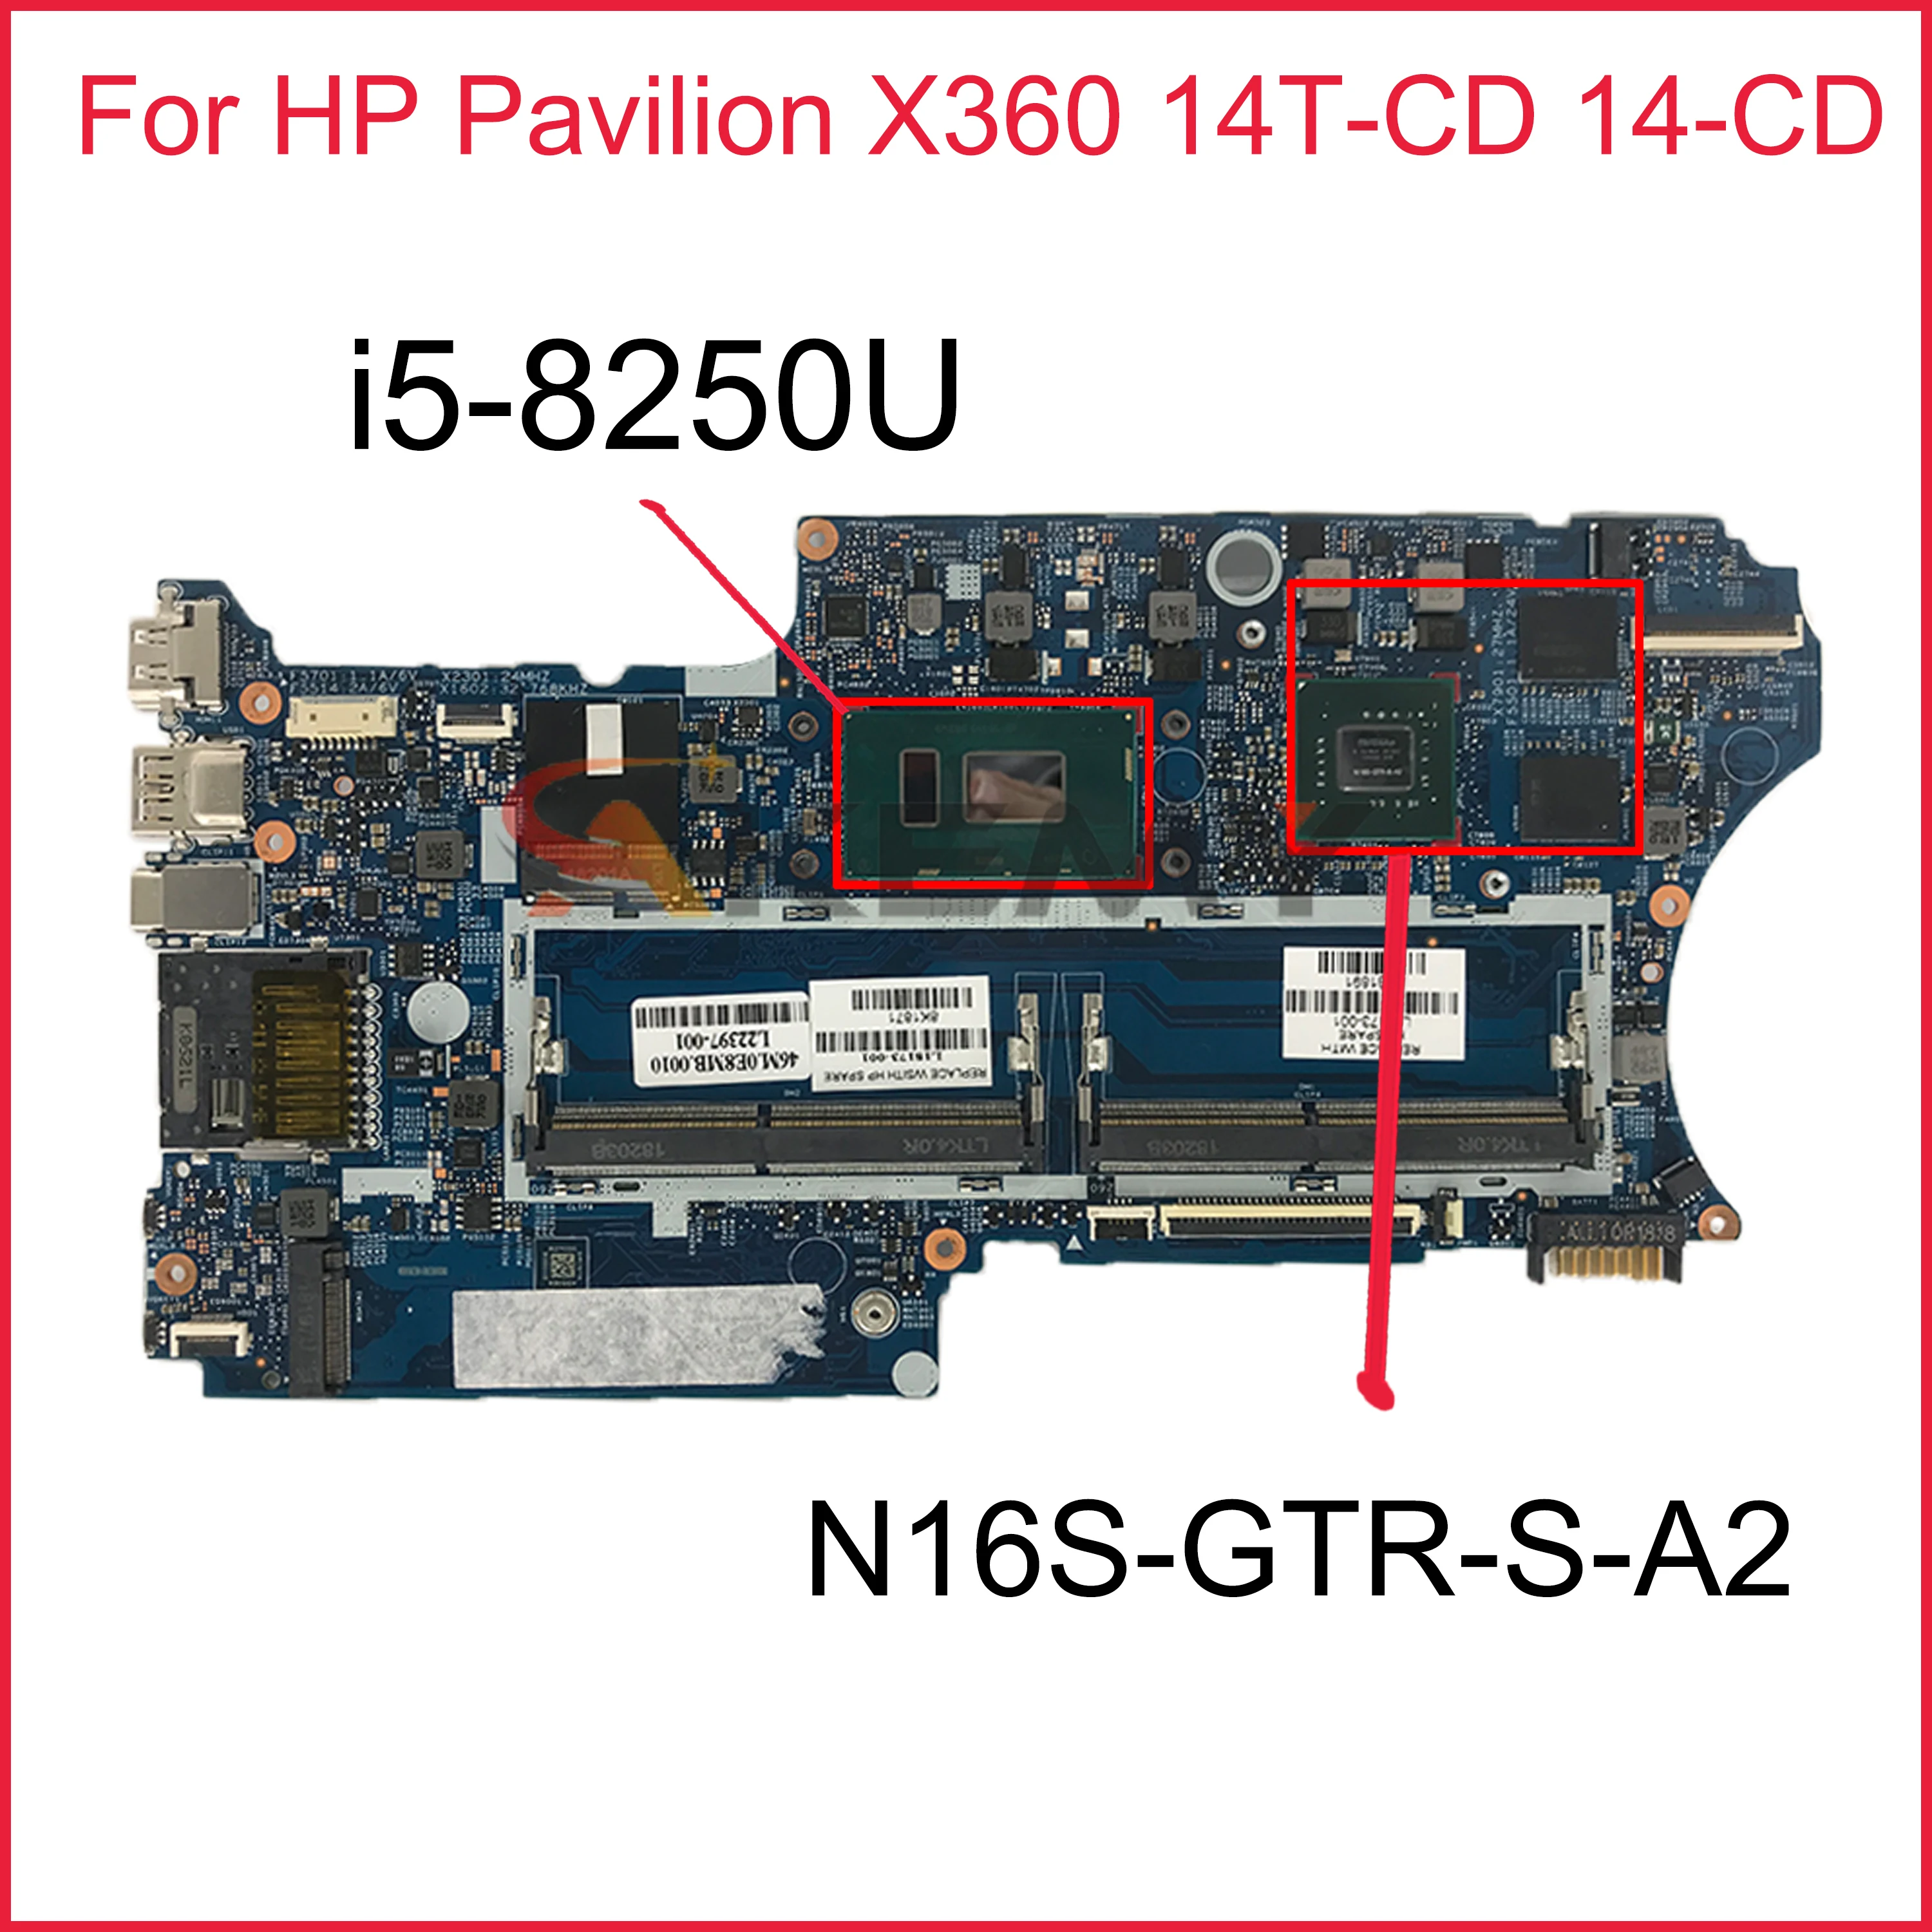 

17878-1B 448.0E905.001B For HP Pavilion X360 14T-CD 14-CD Laptop Motherboard L18157-601 L18157-001 with i5-8250U N16S-GTR-S-A2